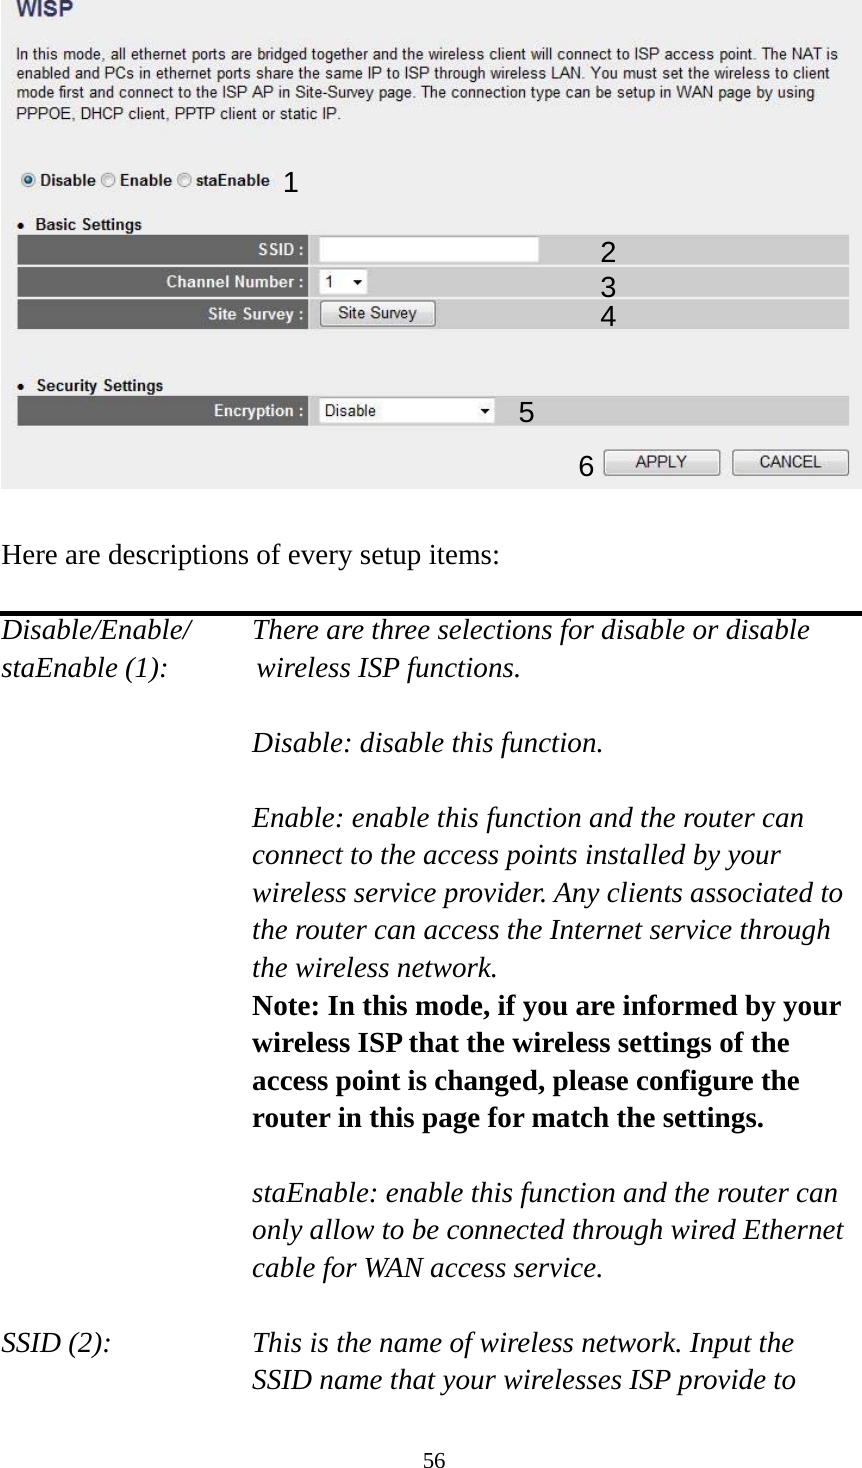 56   Here are descriptions of every setup items:  Disable/Enable/    There are three selections for disable or disable   staEnable (1):      wireless ISP functions.  Disable: disable this function.  Enable: enable this function and the router can connect to the access points installed by your wireless service provider. Any clients associated to the router can access the Internet service through the wireless network. Note: In this mode, if you are informed by your wireless ISP that the wireless settings of the access point is changed, please configure the router in this page for match the settings.  staEnable: enable this function and the router can only allow to be connected through wired Ethernet cable for WAN access service.  SSID (2):    This is the name of wireless network. Input the SSID name that your wirelesses ISP provide to 1 2345 6